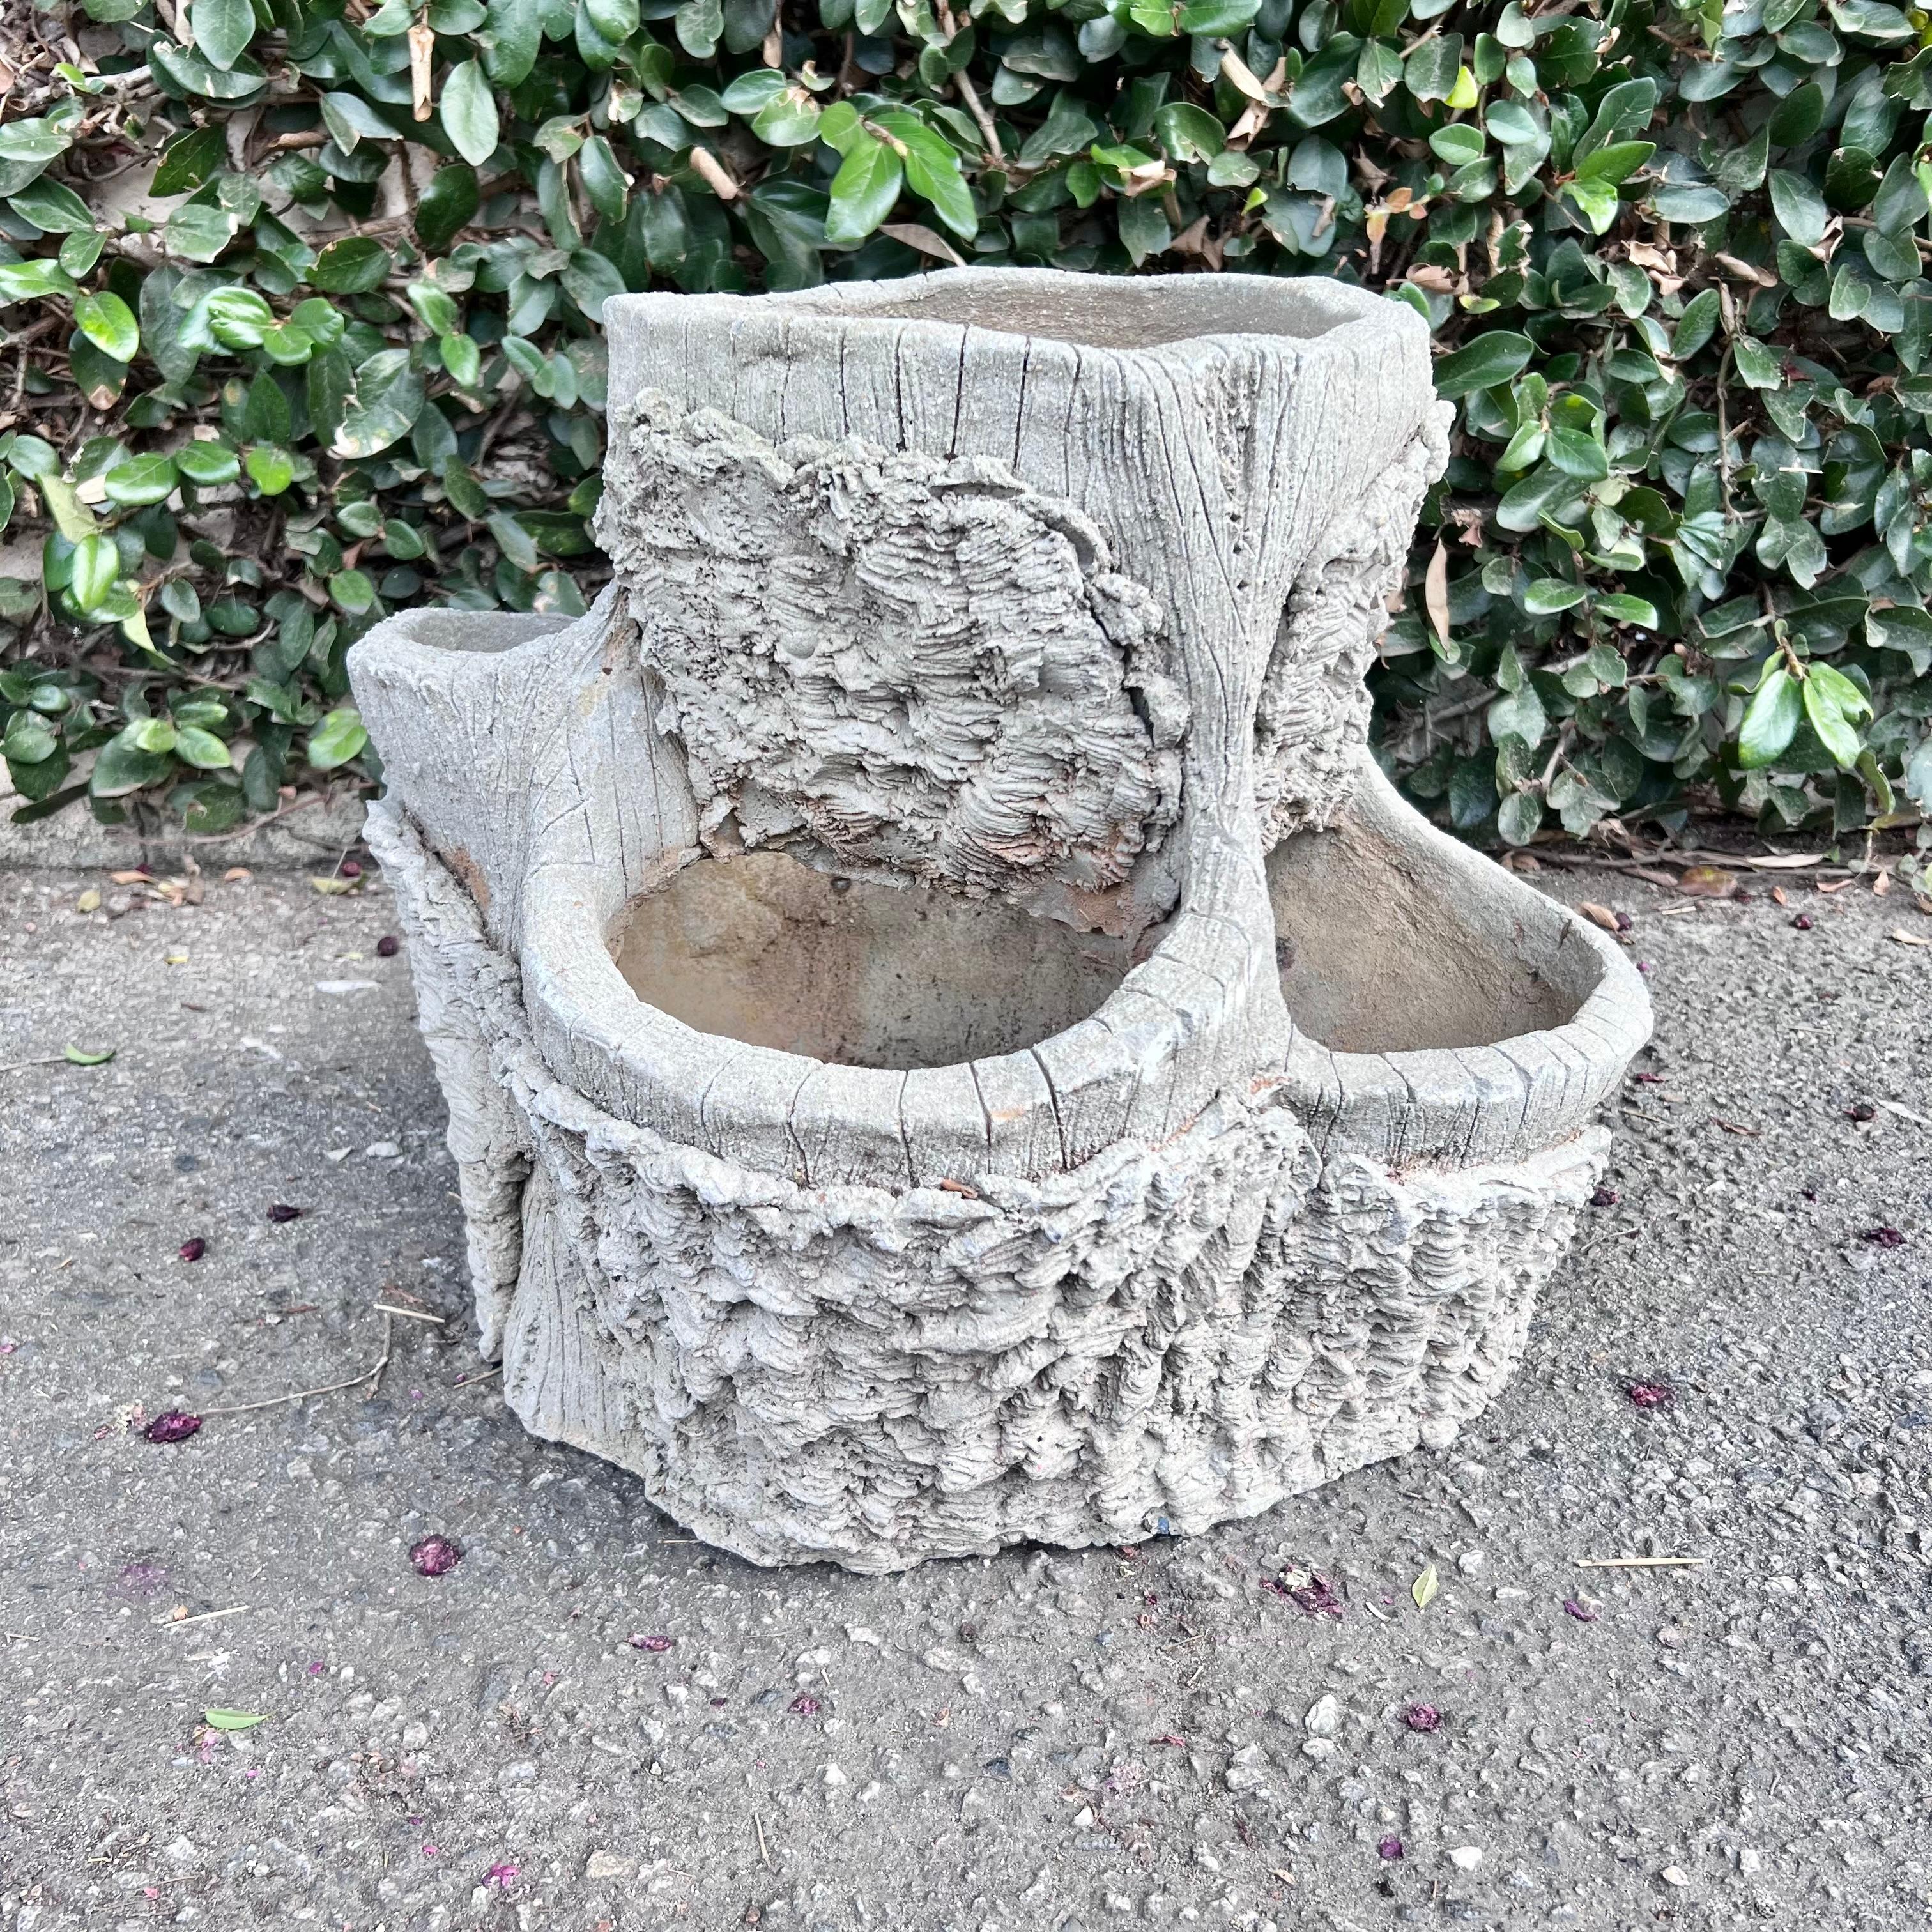 Unusual Faux Bois planter made of concrete, in the form of a tree stump. Great texture and detail. Planter has 4 mouth openings for planting. Really fun sculptural planter with a ton of presence. Good vintage condition.